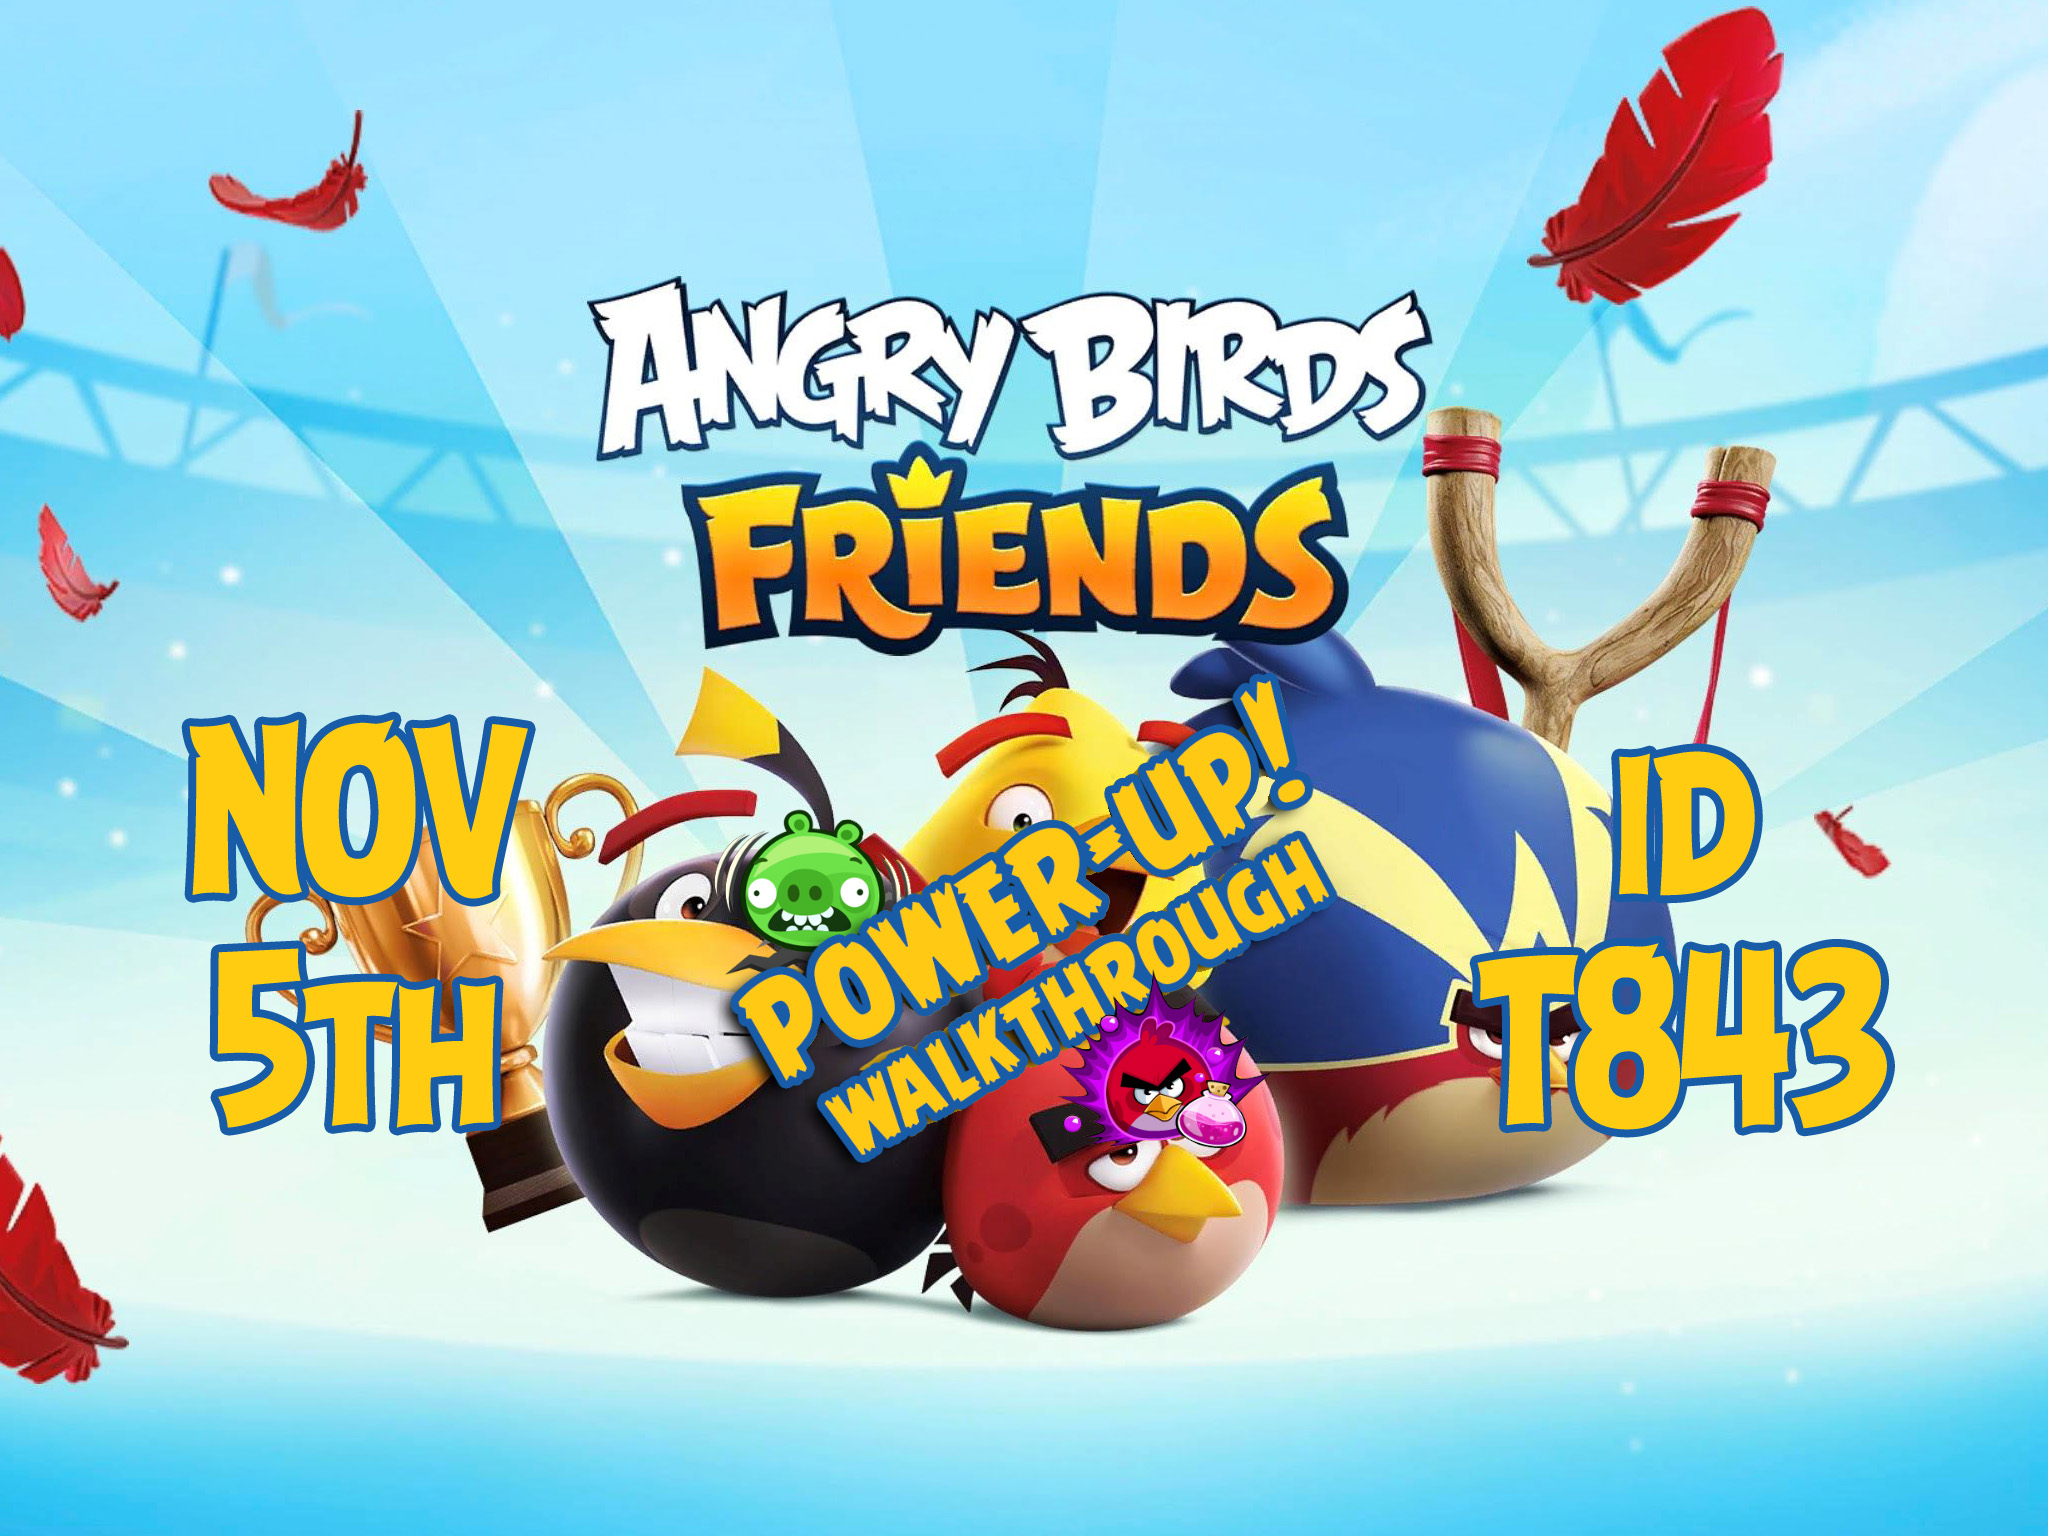 Angry-Birds-Friends-Tournament-T843-Feature-Image-PU